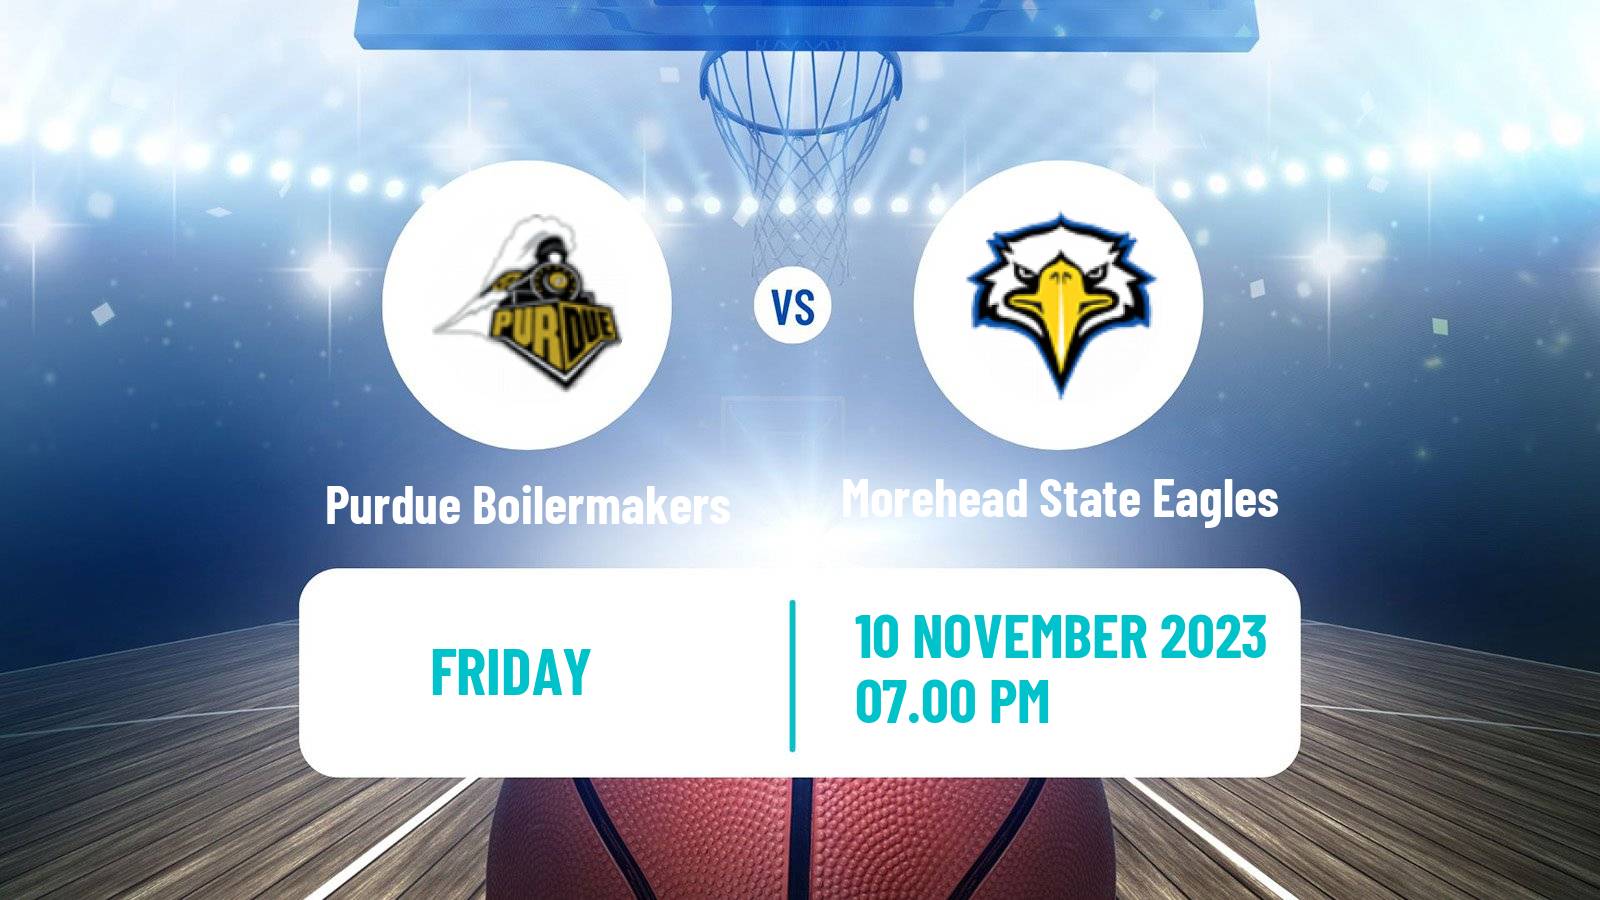 Basketball NCAA College Basketball Purdue Boilermakers - Morehead State Eagles